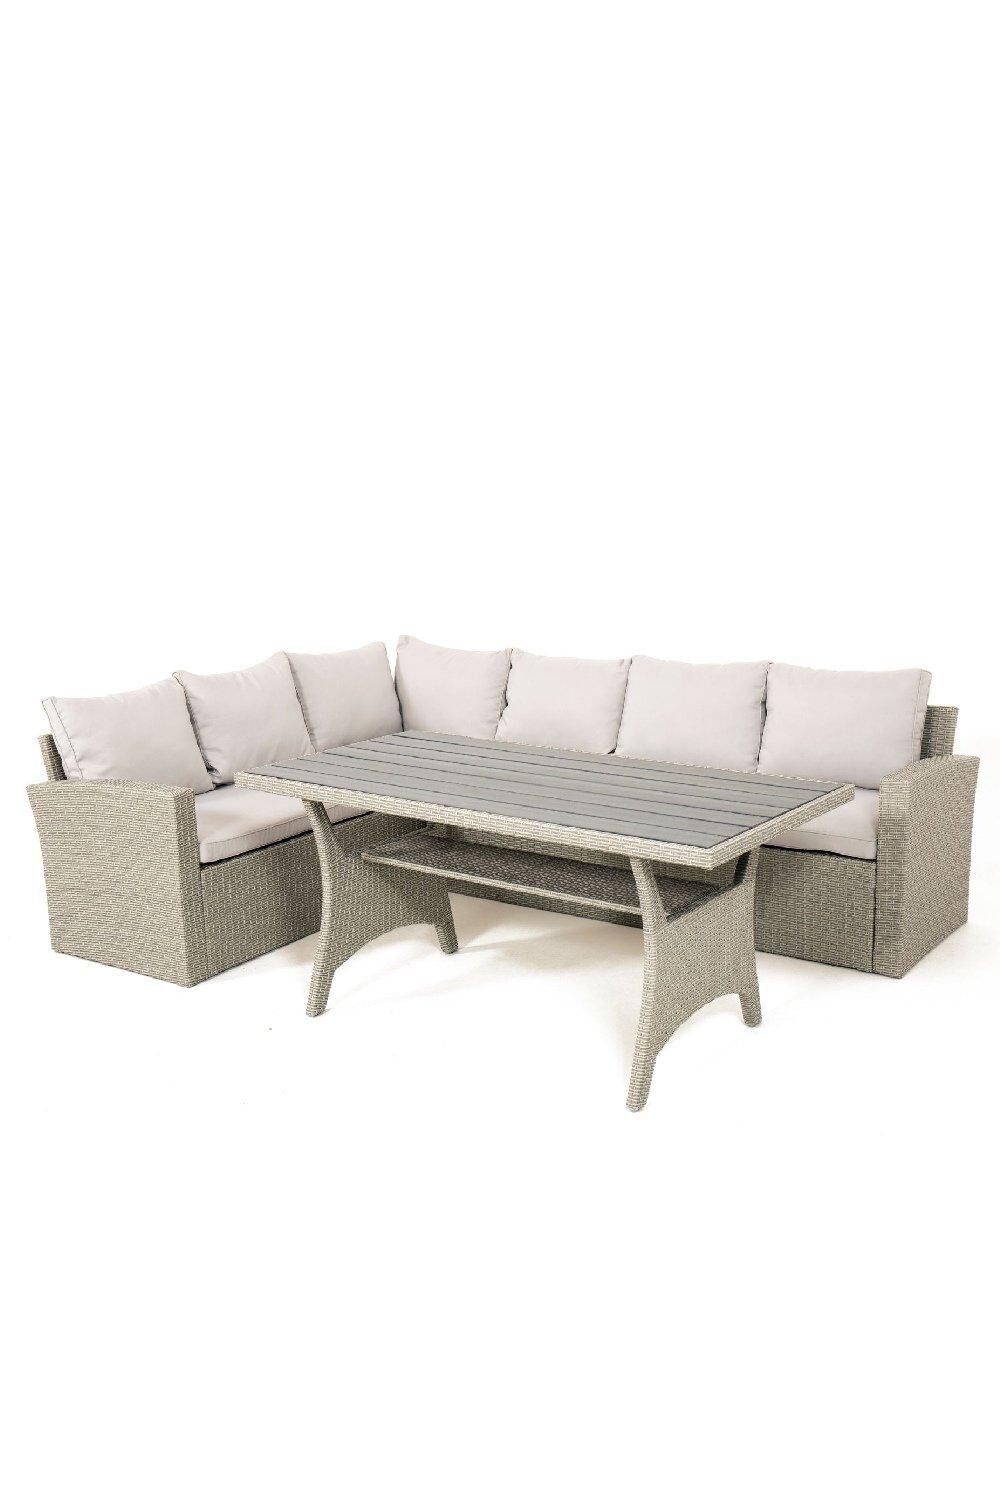 Out & Out Original Stockholm 5 Seater Outdoor Garden Rattan Lounge Set